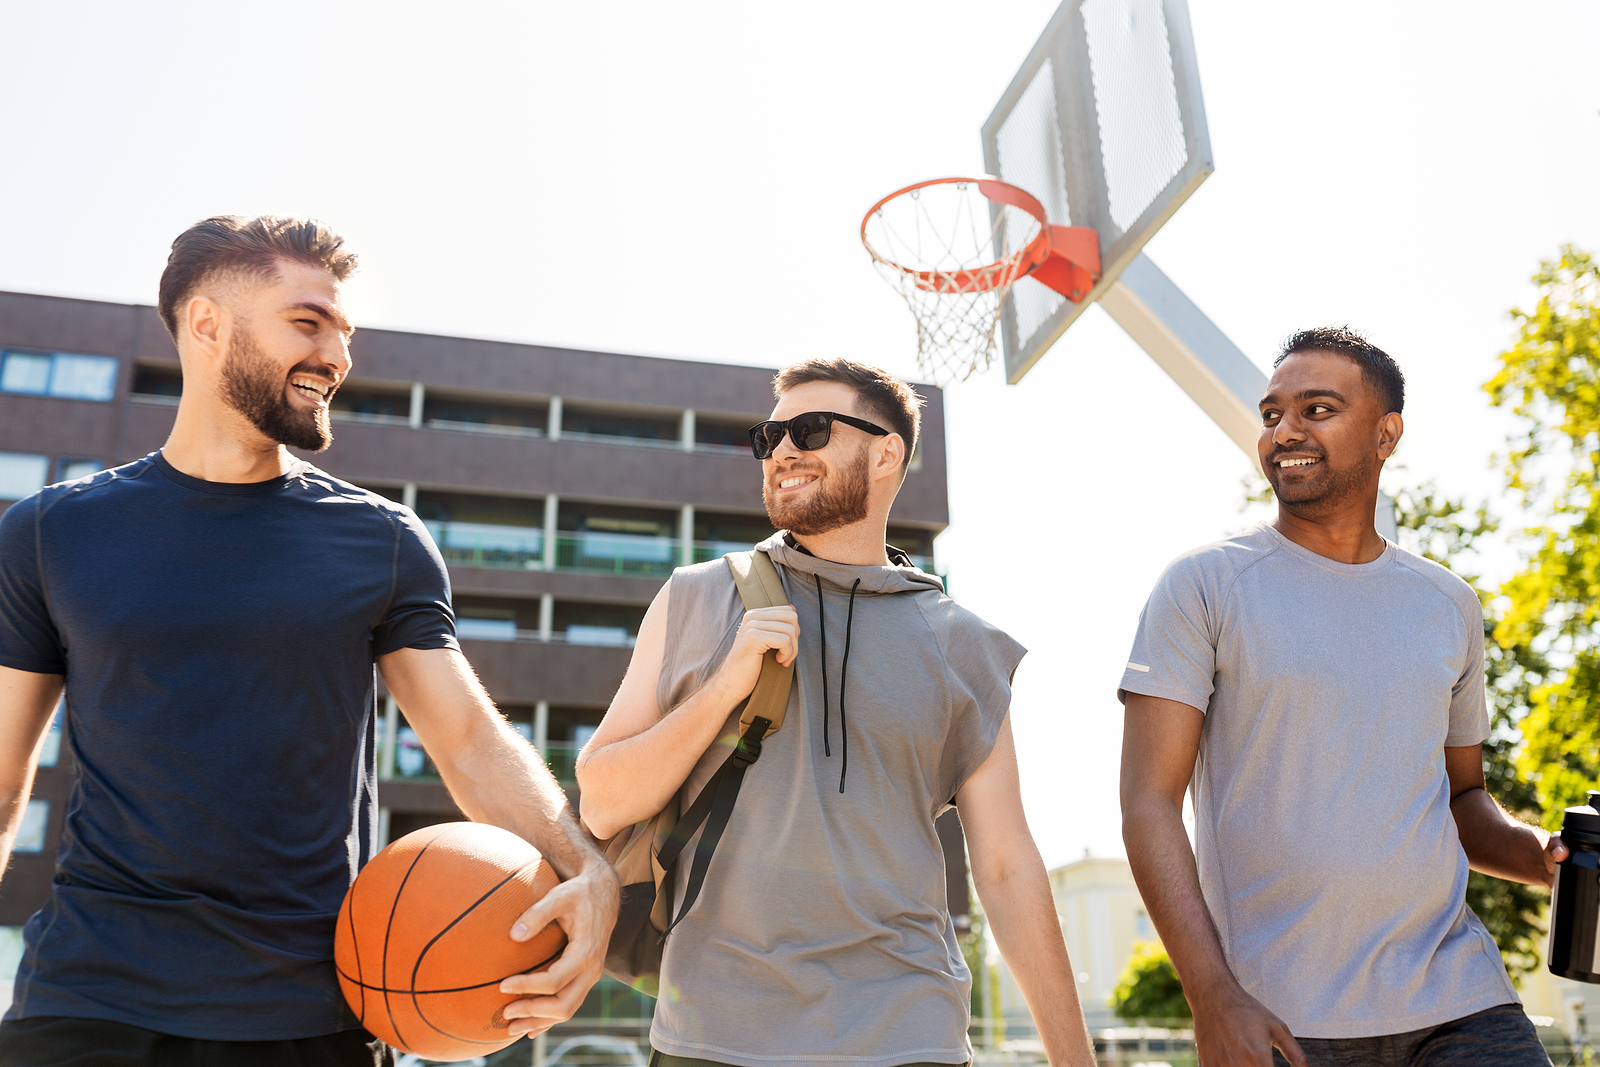 3 attractive guys wearing athletic clothes laughing while one is holding a basketball.